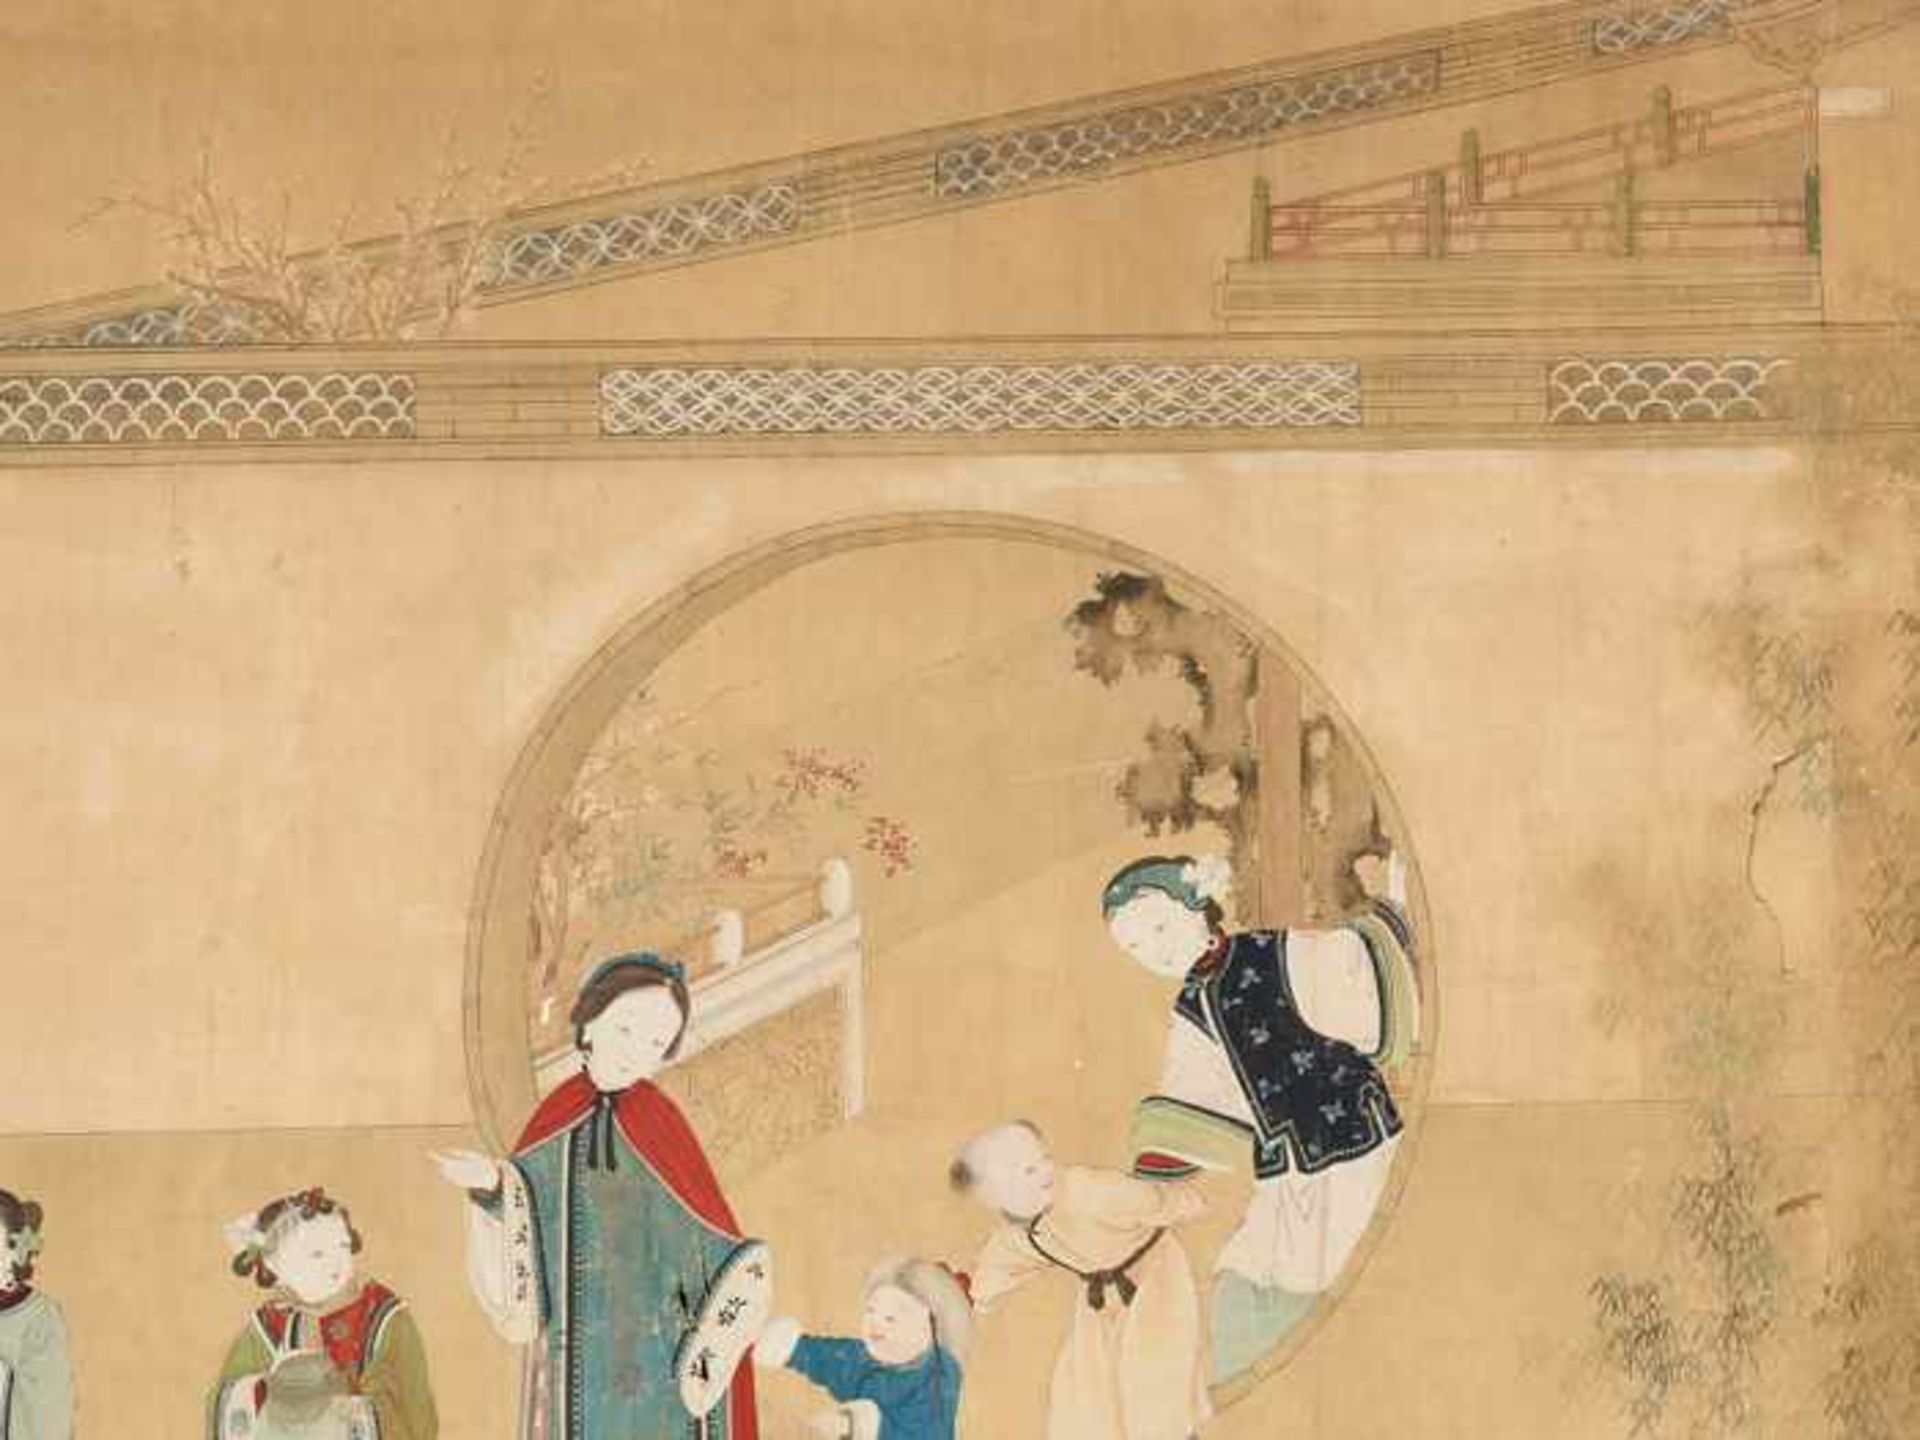 A FINE AND VERY LARGE PAINTING WITH CHILDREN PLAYING IN THE PALACE GARDEN Ink and color on paper, - Image 5 of 7